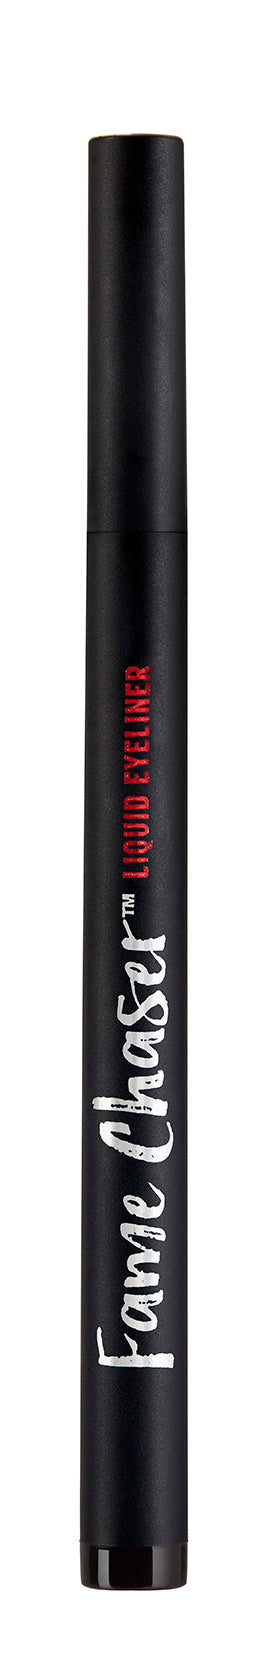 Load image into Gallery viewer, Ardell Beauty - Fame Chaser Liquid Eyeliner Patent Leather (1ml)
